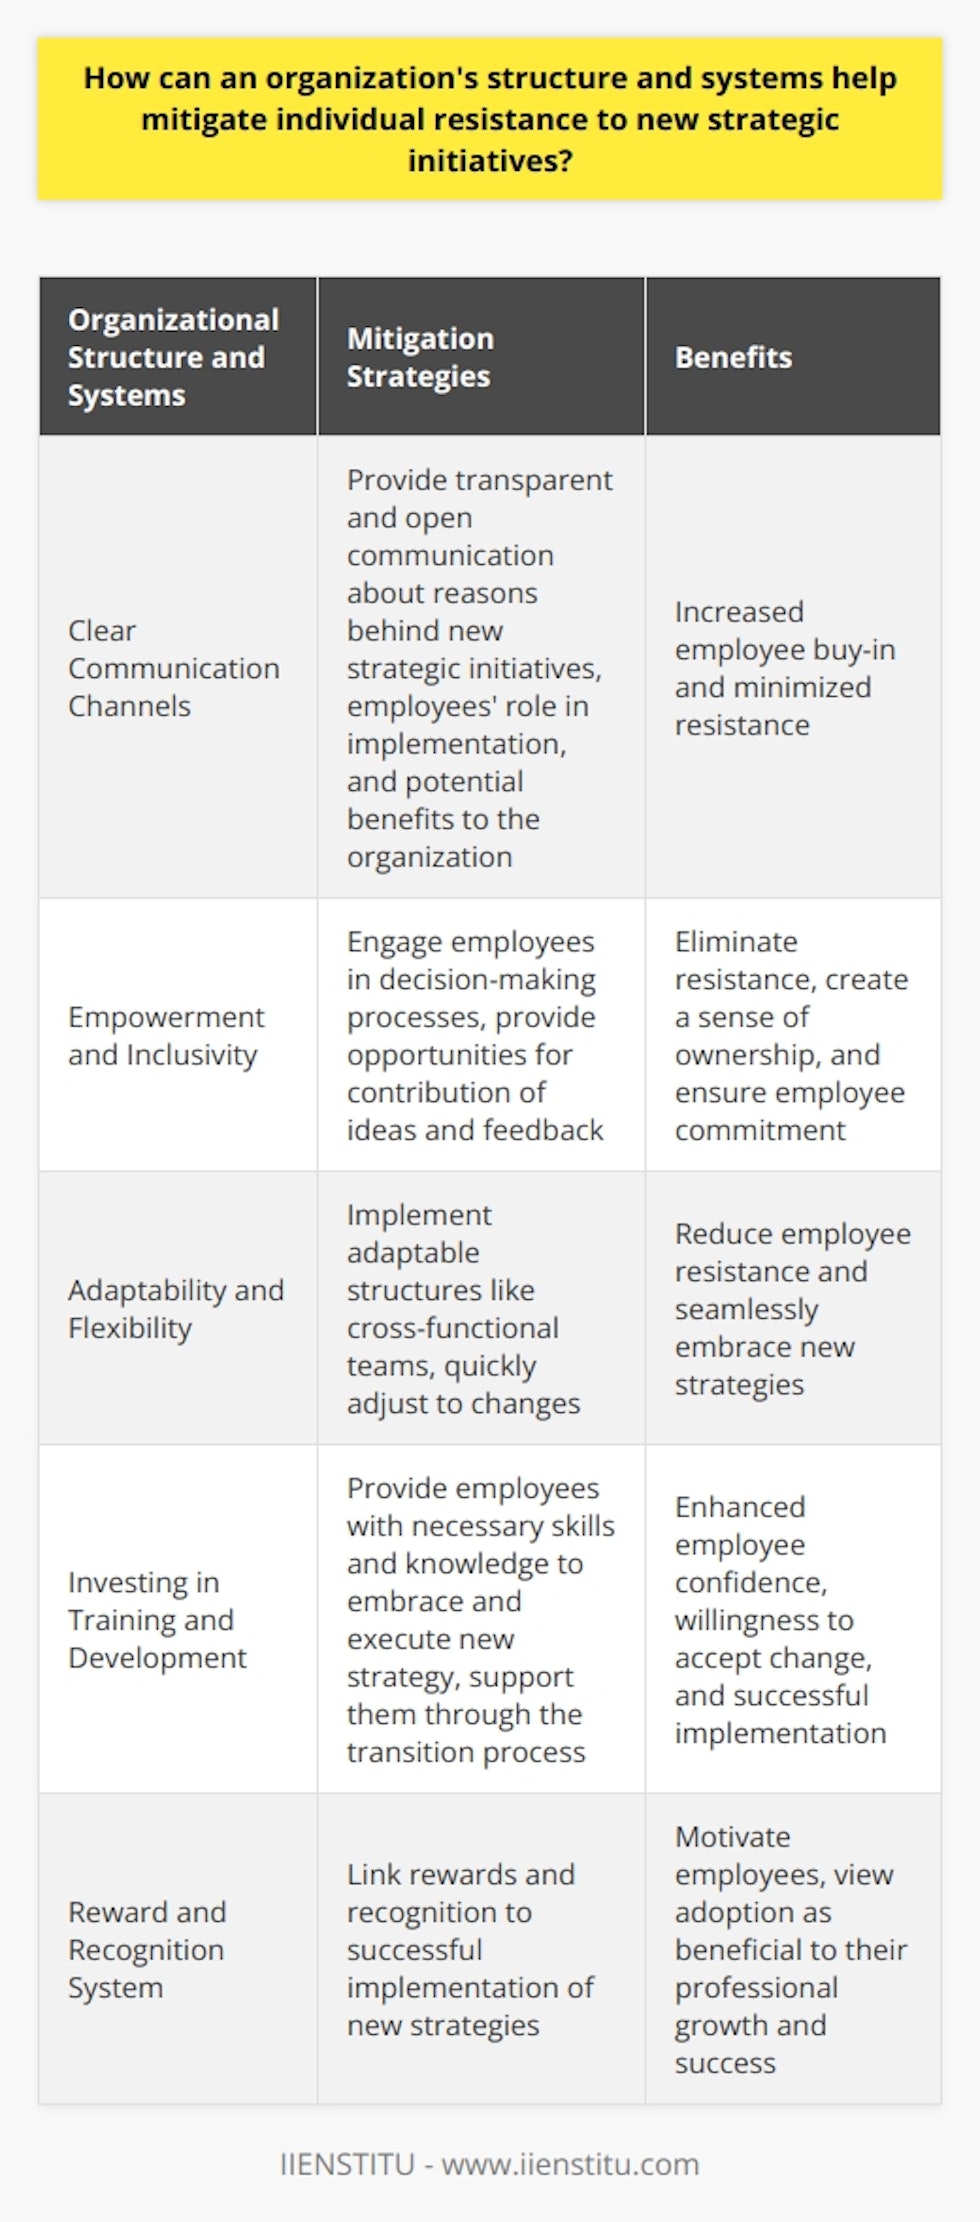 Organizational structure and systems play a significant role in mitigating individual resistance to new strategic initiatives within an organization. By implementing clear communication channels, promoting empowerment and inclusivity, fostering adaptability and flexibility, investing in training and development, and implementing a reward and recognition system, organizations can effectively address resistance and encourage employee support for strategic changes.Clear communication channels are essential in ensuring that employees understand the reasons behind the new strategic initiatives, their role in implementing them, and the potential benefits to the organization. By providing transparent and open communication, organizations can increase employee buy-in and minimize resistance.Empowerment and inclusivity are key factors in overcoming resistance. By engaging employees in decision-making processes and providing opportunities for them to contribute ideas and feedback, organizations create a sense of ownership. This sense of ownership not only eliminates potential resistance but also ensures that employees feel empowered and committed to the success of the new strategy.Adaptability and flexibility are crucial in integrating new strategic initiatives into existing systems. By implementing adaptable structures, such as cross-functional teams, organizations can quickly and effectively adjust to changes, reducing employee resistance to fresh initiatives. A well-designed structure that fosters adaptability and flexibility can help organizations seamlessly embrace new strategies.Investing in training and development is another effective measure to reduce individual resistance. Providing employees with the necessary skills and knowledge to embrace and execute the new strategy enhances their confidence and willingness to accept change. Supporting employees through the transition process can further minimize their resistance and promote successful implementation.In addition, organizations can use their reward and recognition system to motivate employees to accept and support new strategic initiatives. By linking rewards and recognition to the successful implementation of the new strategies, organizations ensure that employees view this adoption as beneficial to their professional growth and success. This approach encourages employees to actively participate in and support the new strategic initiatives.In conclusion, an organization's structure and systems play a crucial role in mitigating individual resistance to new strategic initiatives. By promoting clear communication, empowerment, adaptability, comprehensive training, and a supportive reward system, organizations can effectively address resistance and encourage employee buy-in. Implementing these measures greatly increases the chances of success for new strategic initiatives.